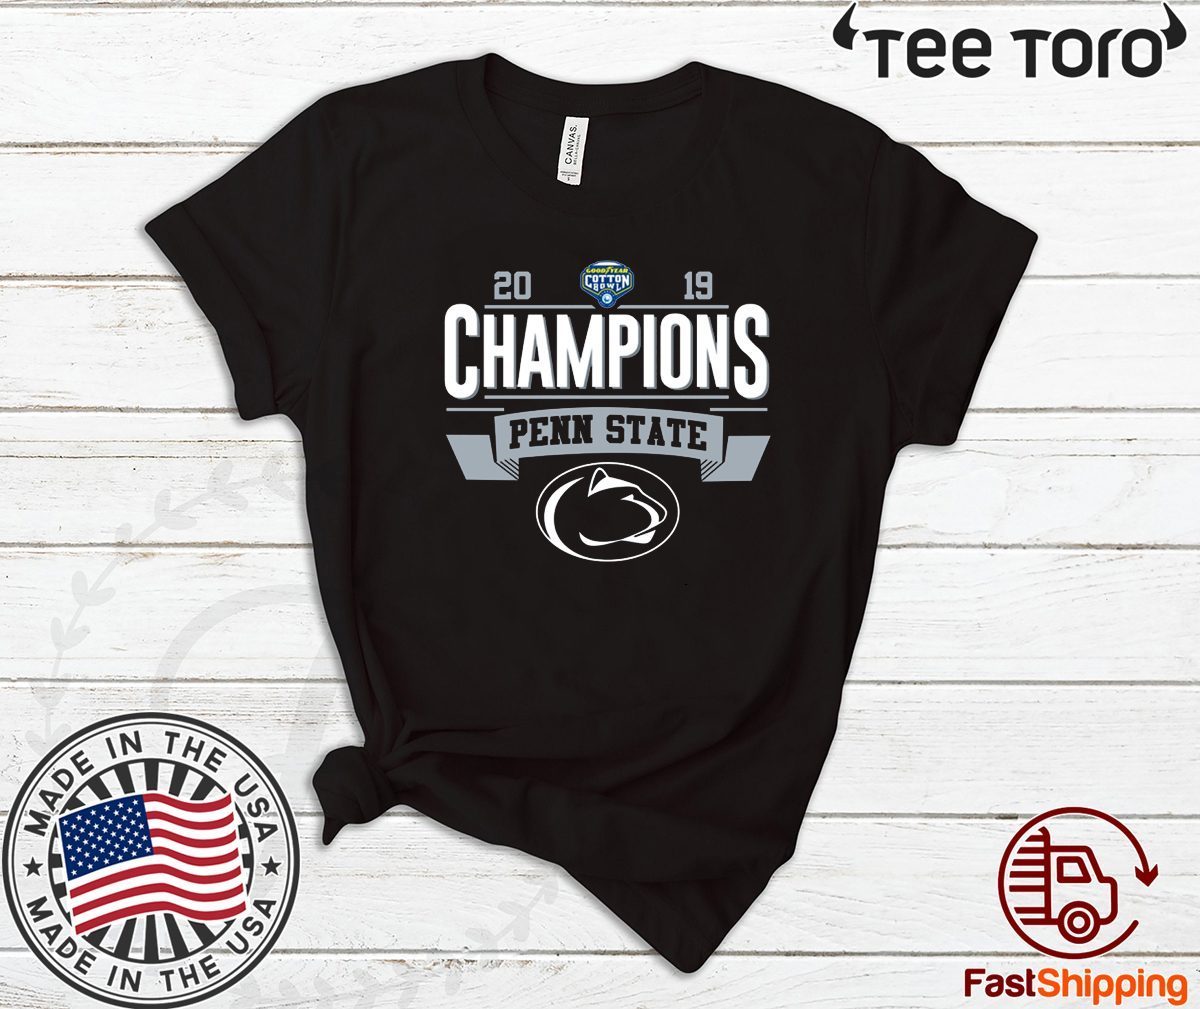 Penn State Cotton Bowl Champions T Shirt - ReviewsTees